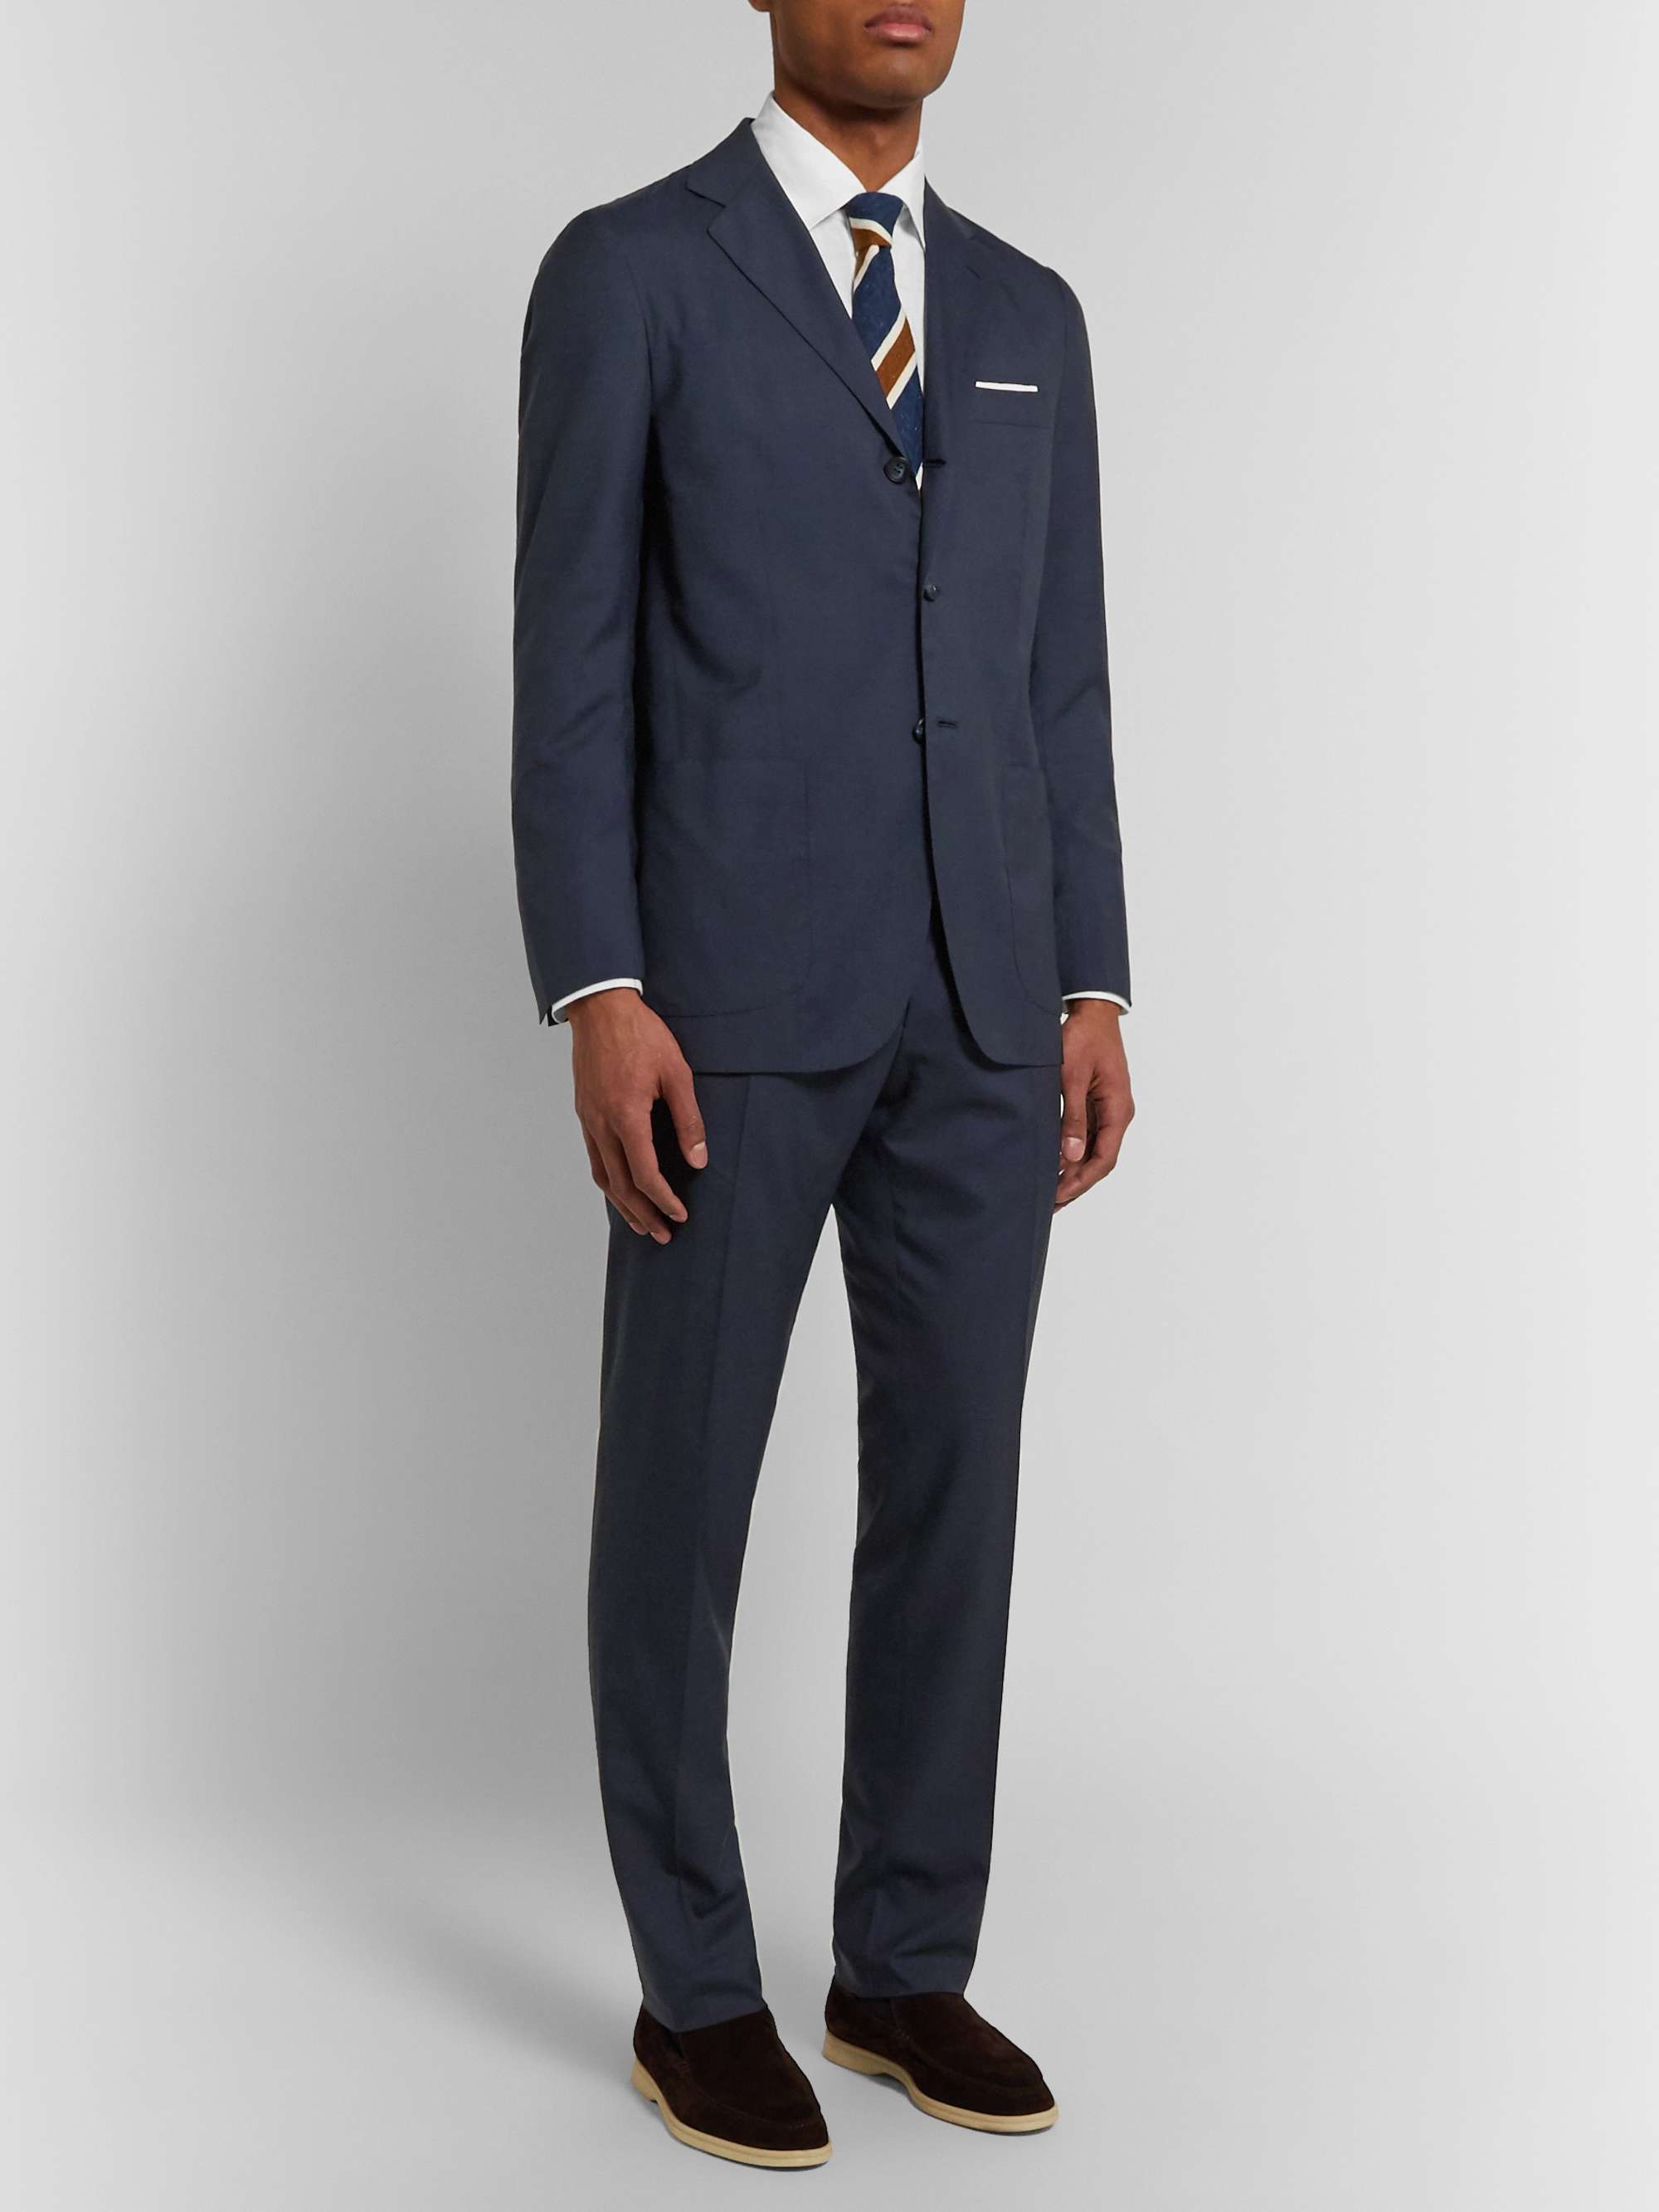 KITON Slim-Fit Puppytooth Cashmere Suit Trousers